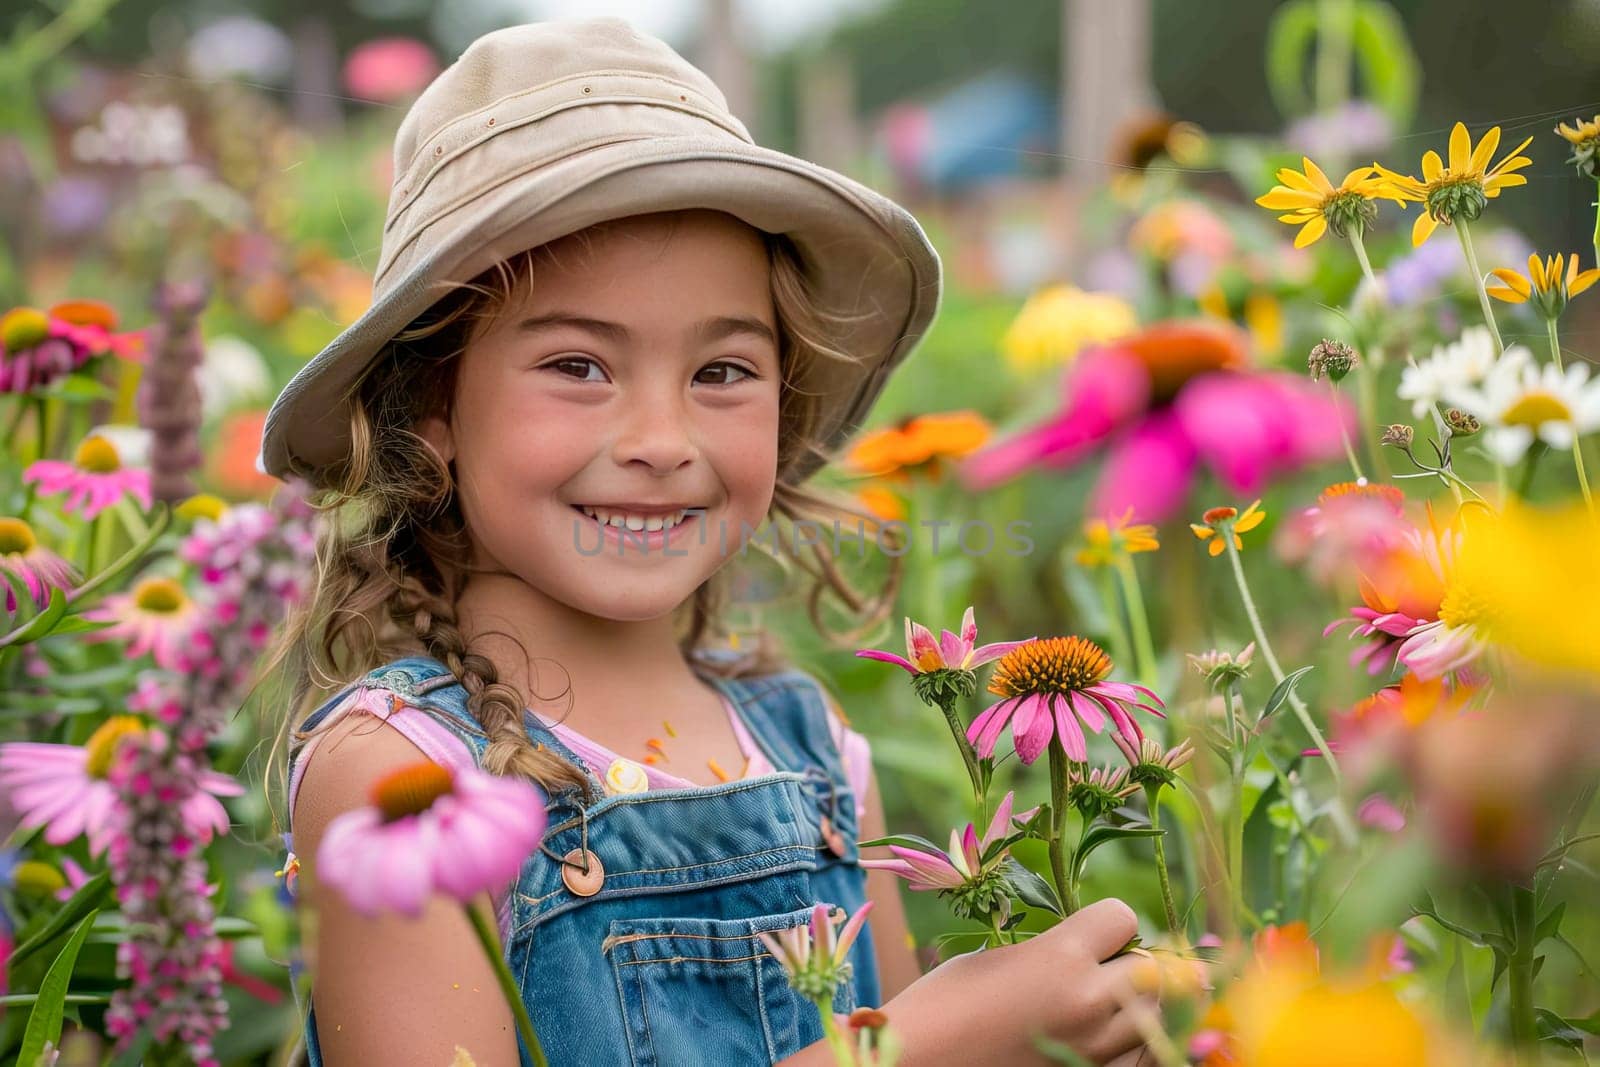 Happy girl in overalls and hat doing gardening and smiling at the camera, in a garden with many bright flowers.